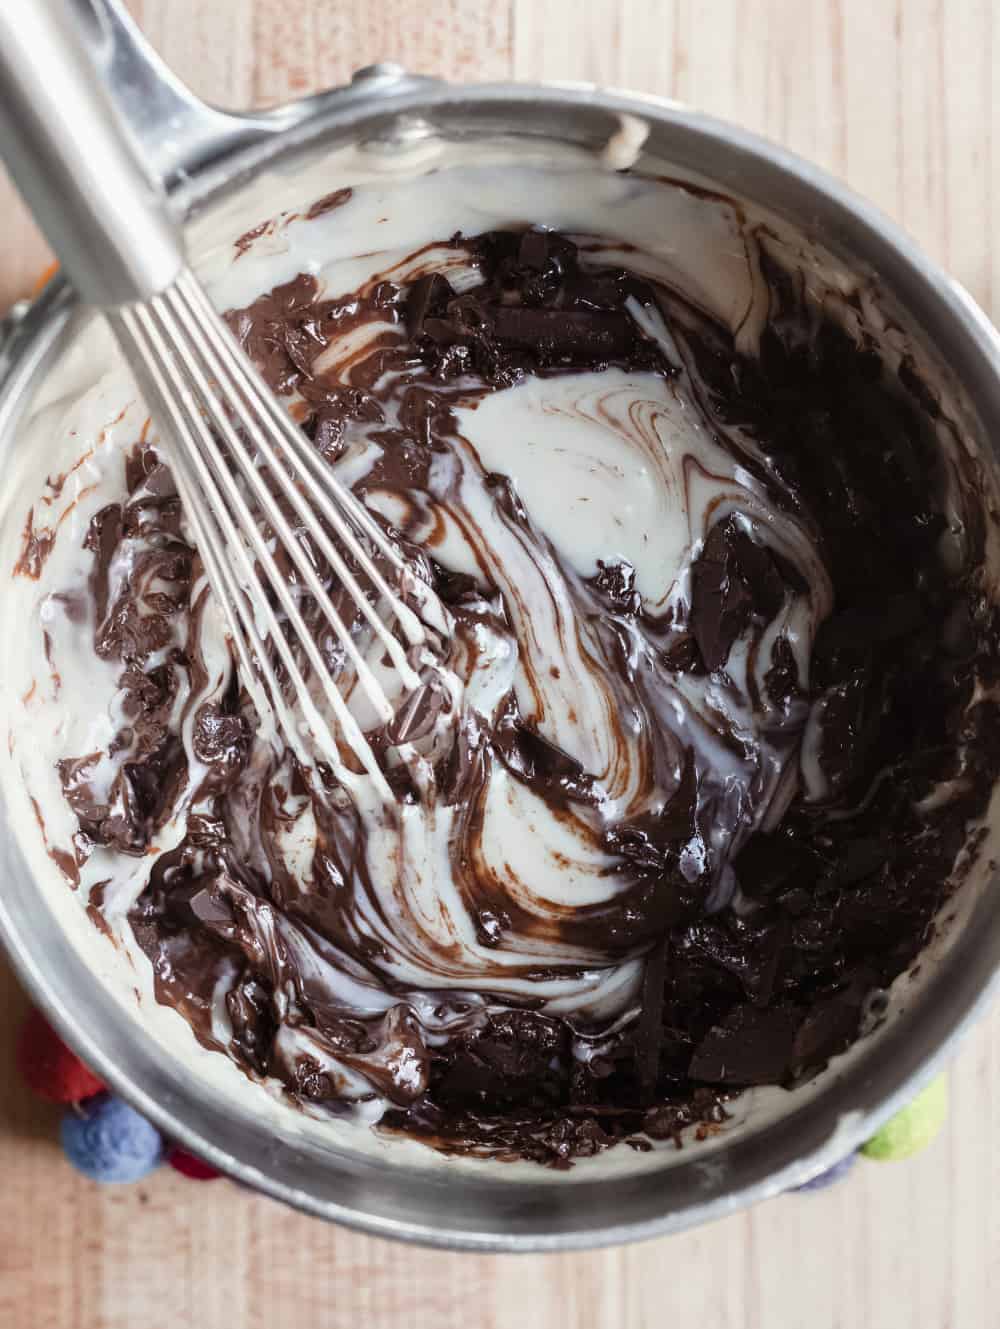 Whisk stirring melted chocolate into homemade pudding in a saucepan